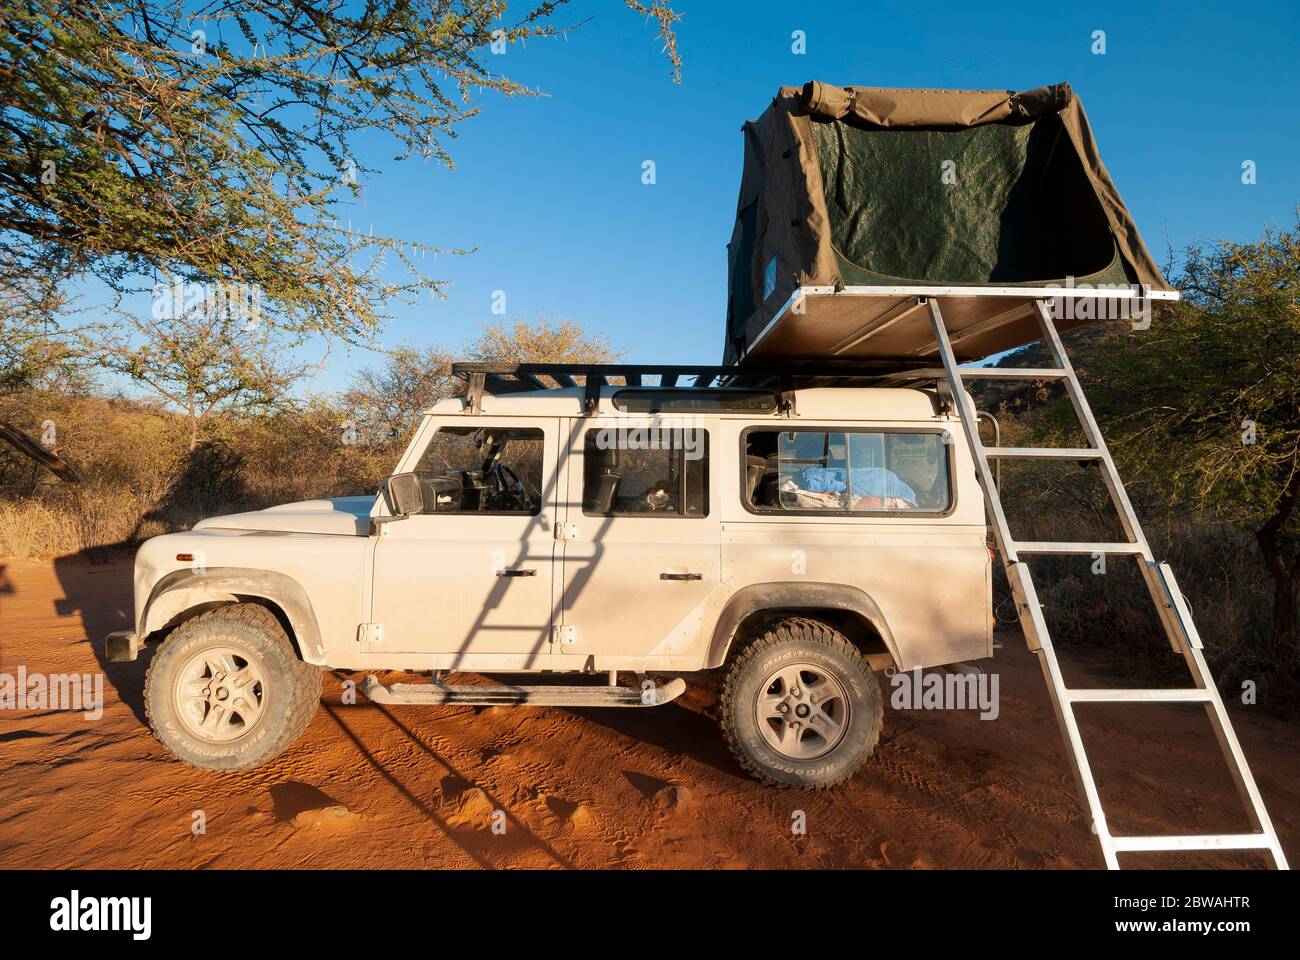 A 4WD car (landrover) with rooftop tent on Safari in Etosha National Park, Namibia, Southern Africa. Stock Photo